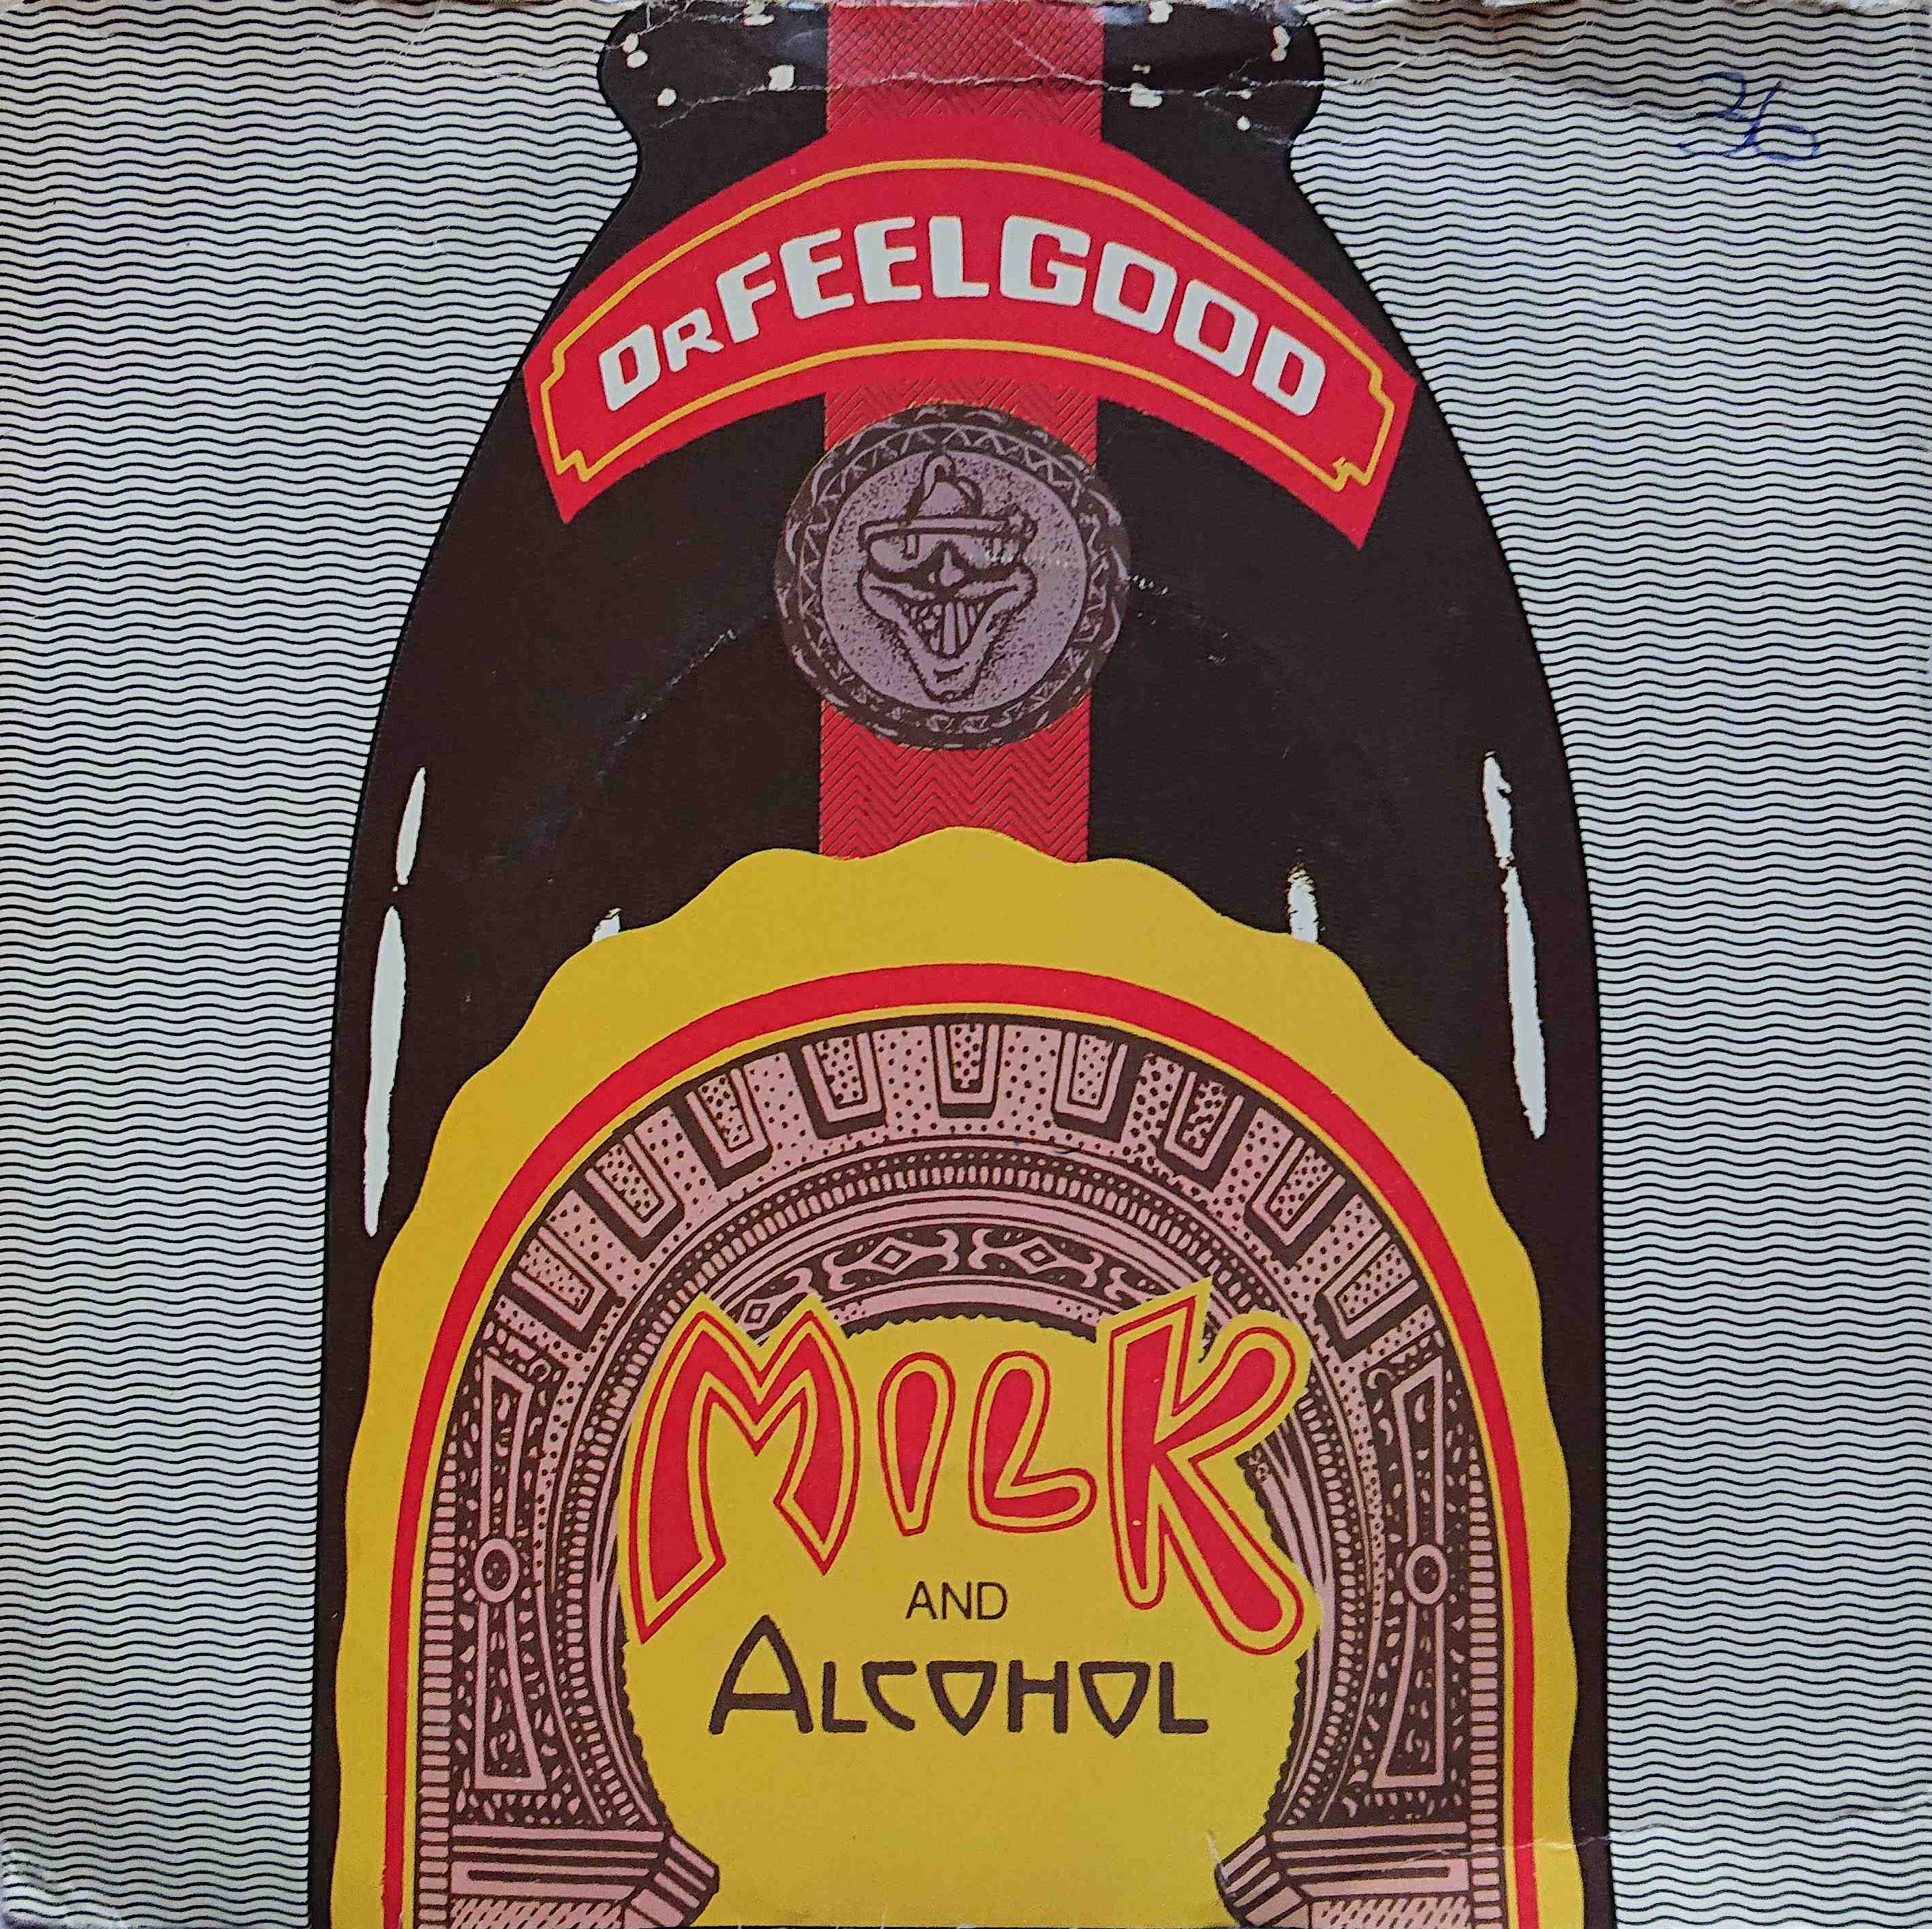 Picture of Milk and alcohol by artist Dr Feelgood 